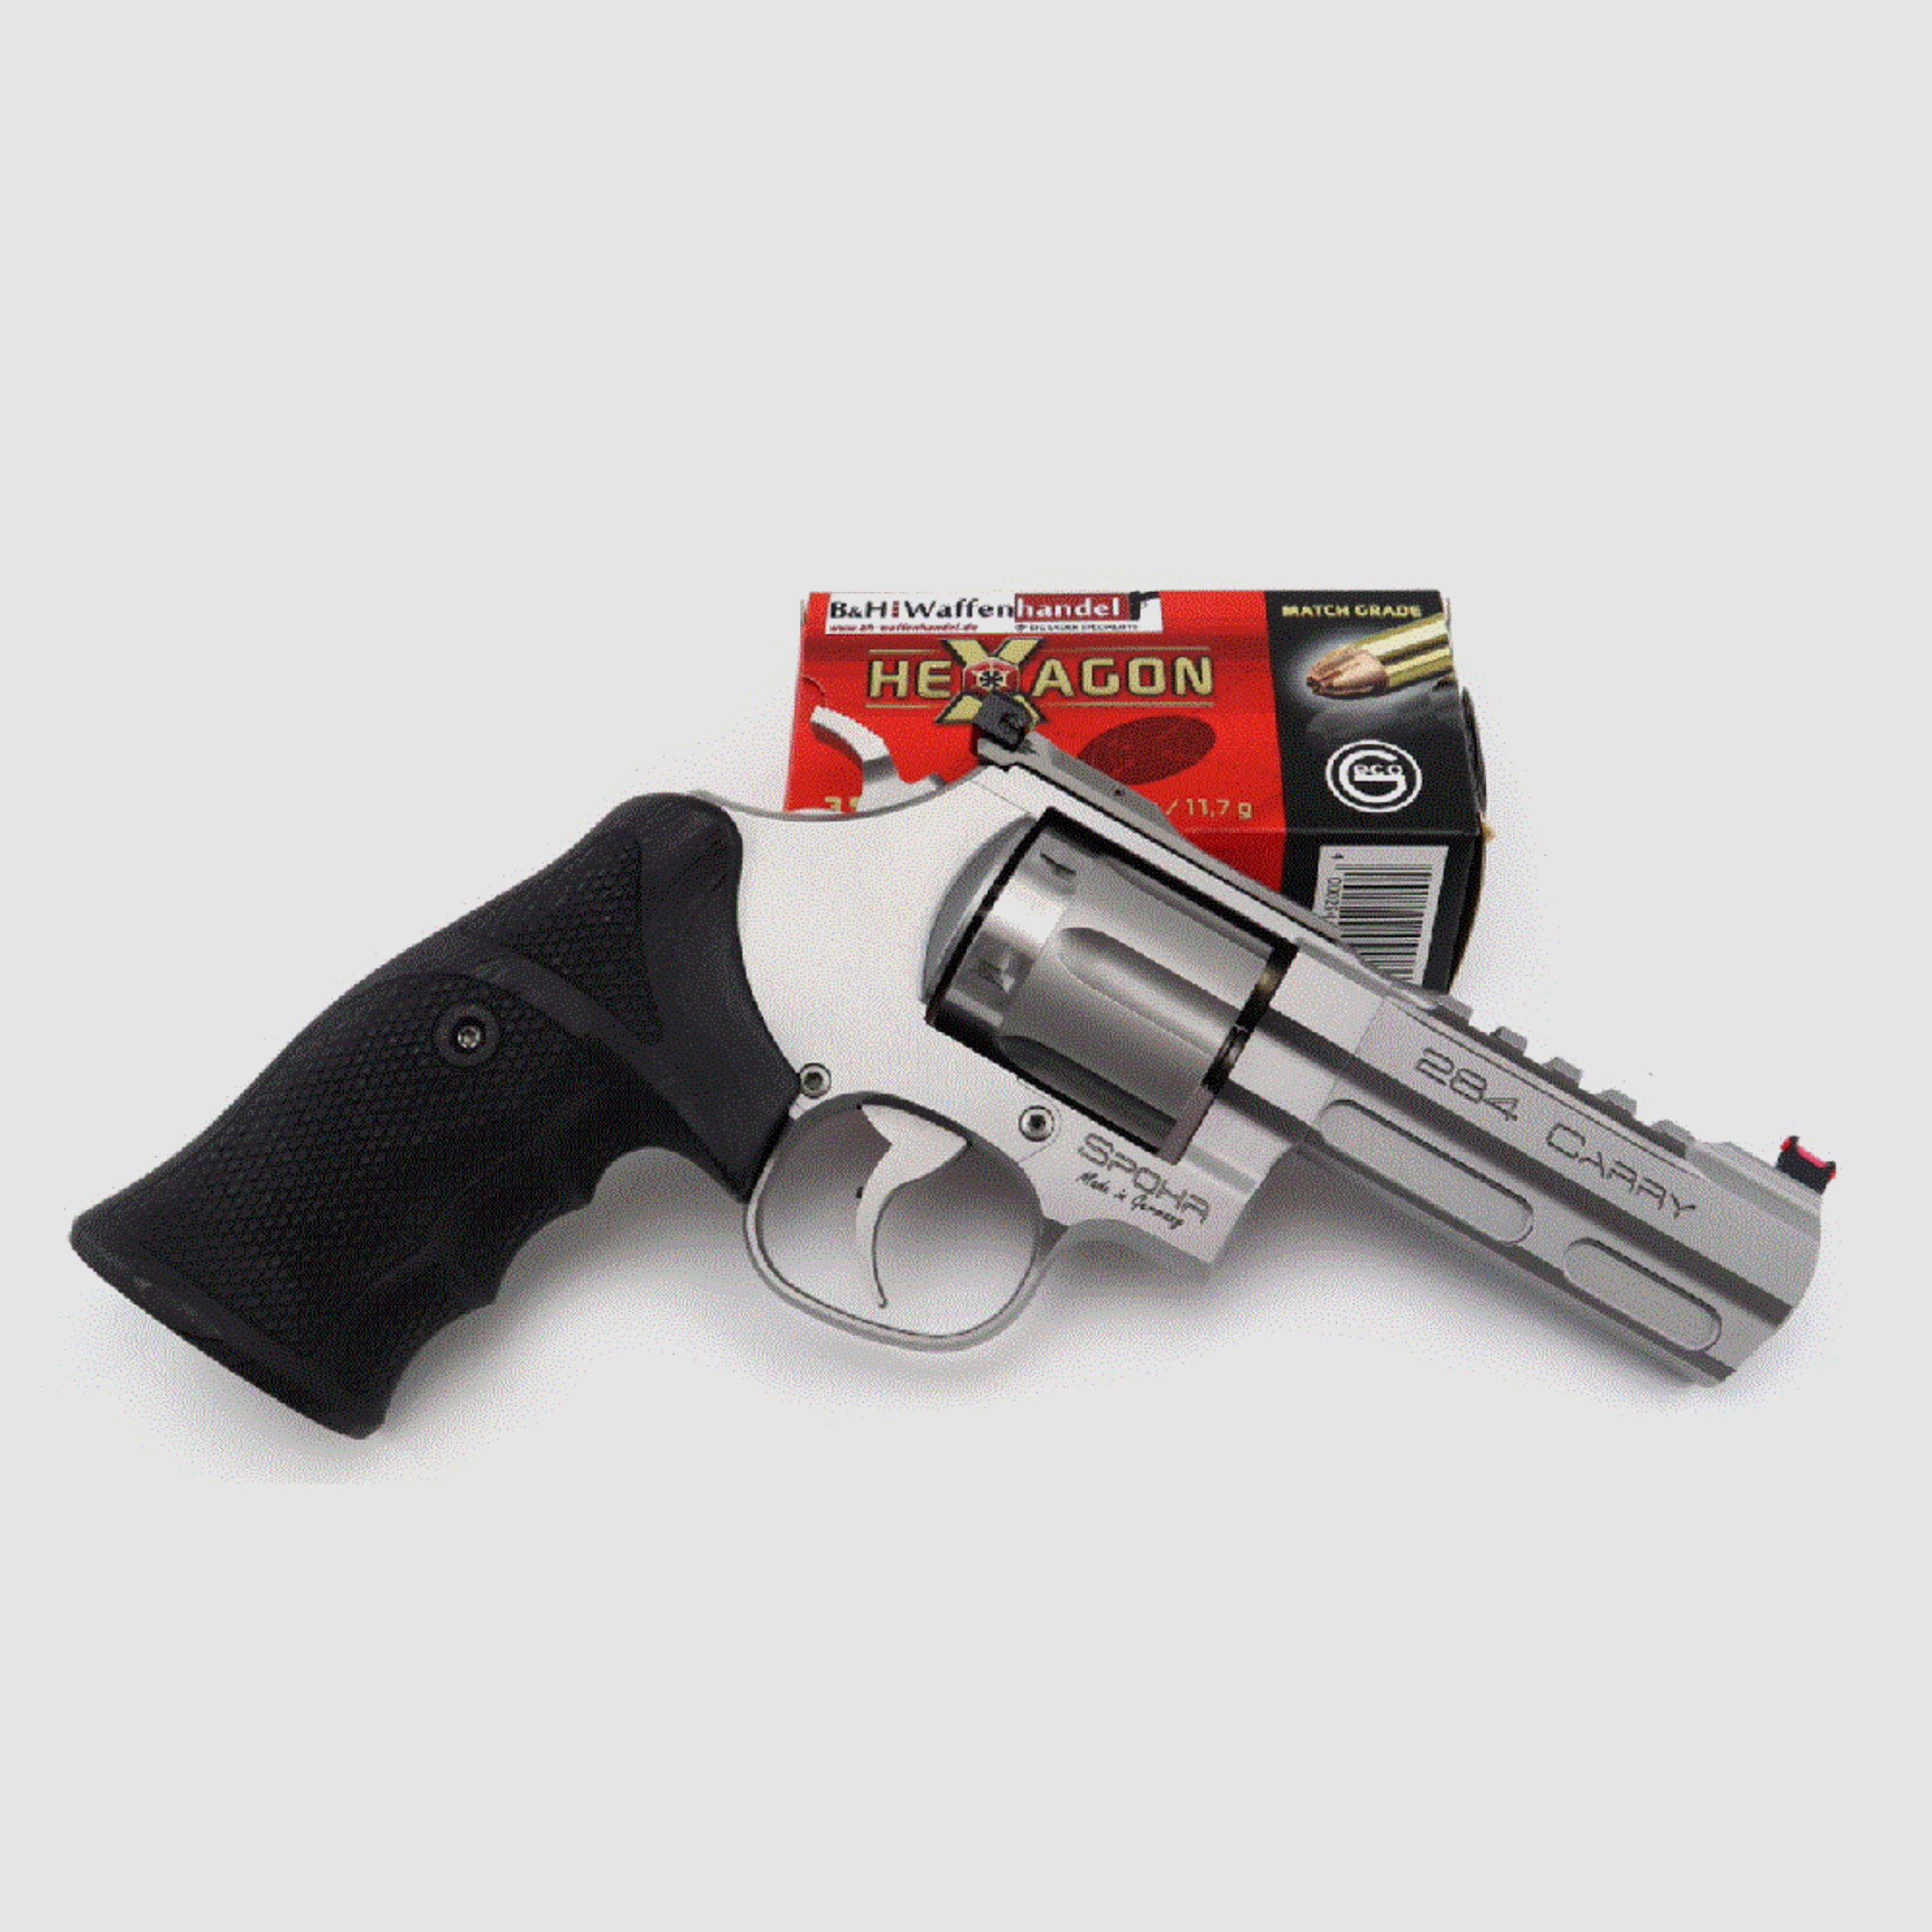 Spohr 284 Carry stainless, .357 Magnum